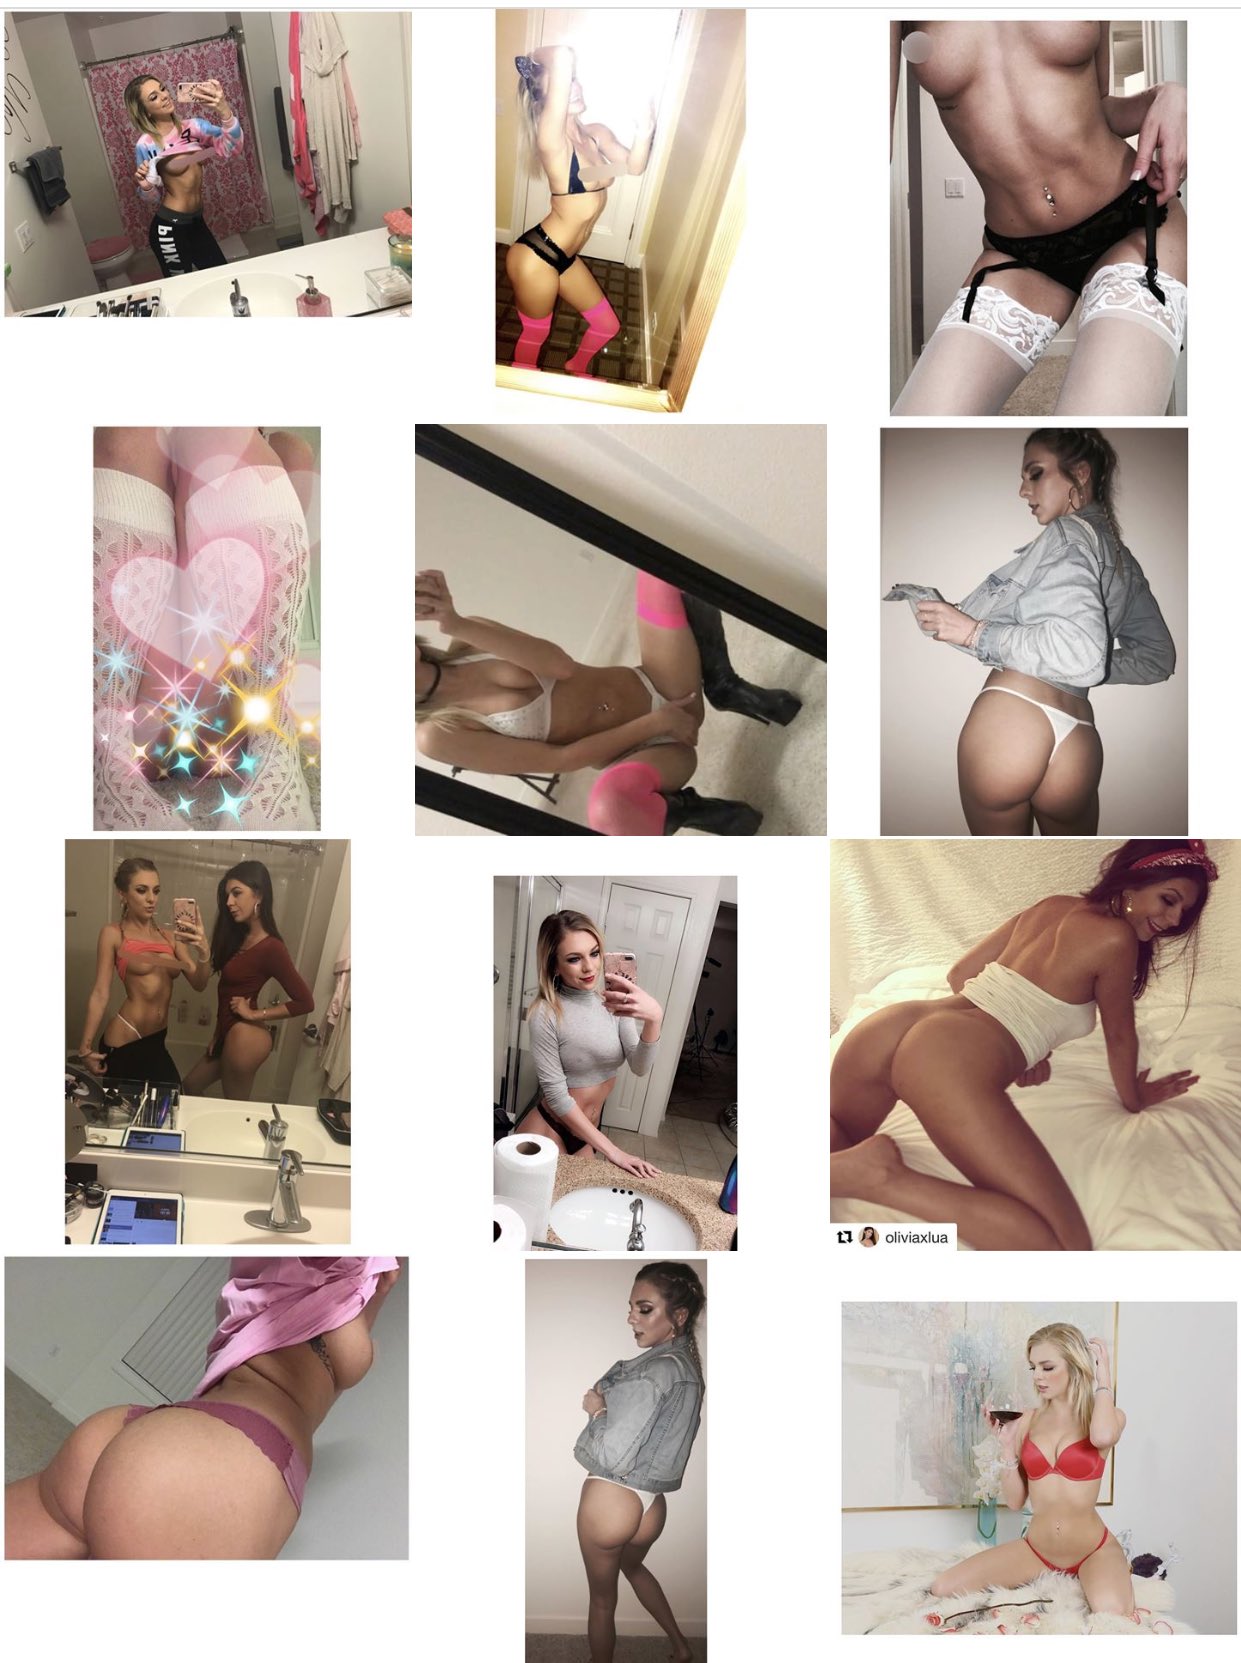 My Instagram 😌🤷🏼‍♀️ if you dont follow me, go check it out 👉🏼 blondemiinx 👈🏼 👸🏼✨ https://t.co/bB9YDb